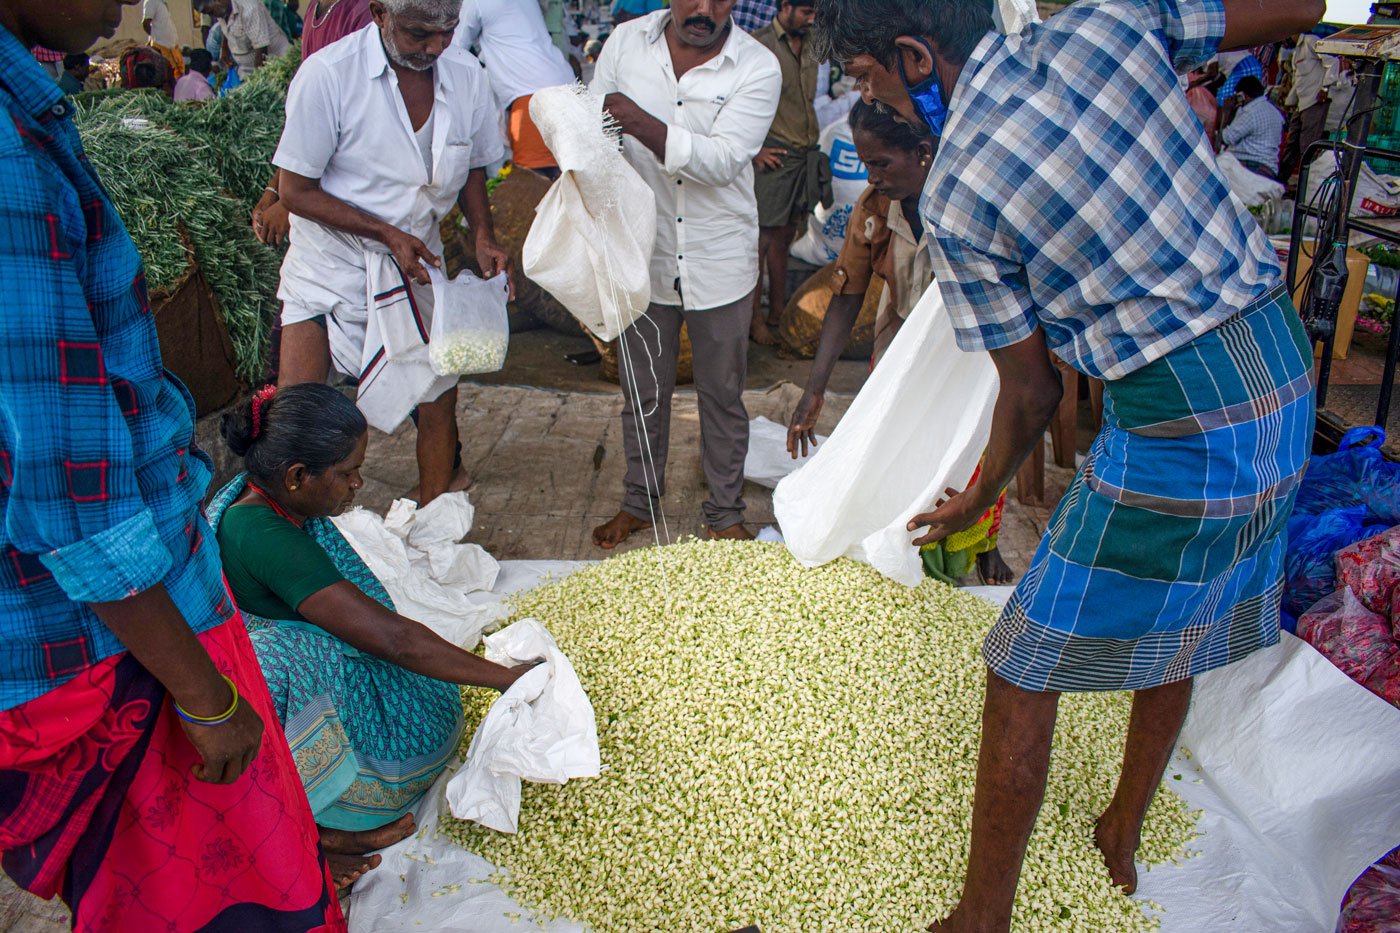 Farmers empty sacks full of Madurai malli at the flower market. The buds must be sold before they blossom